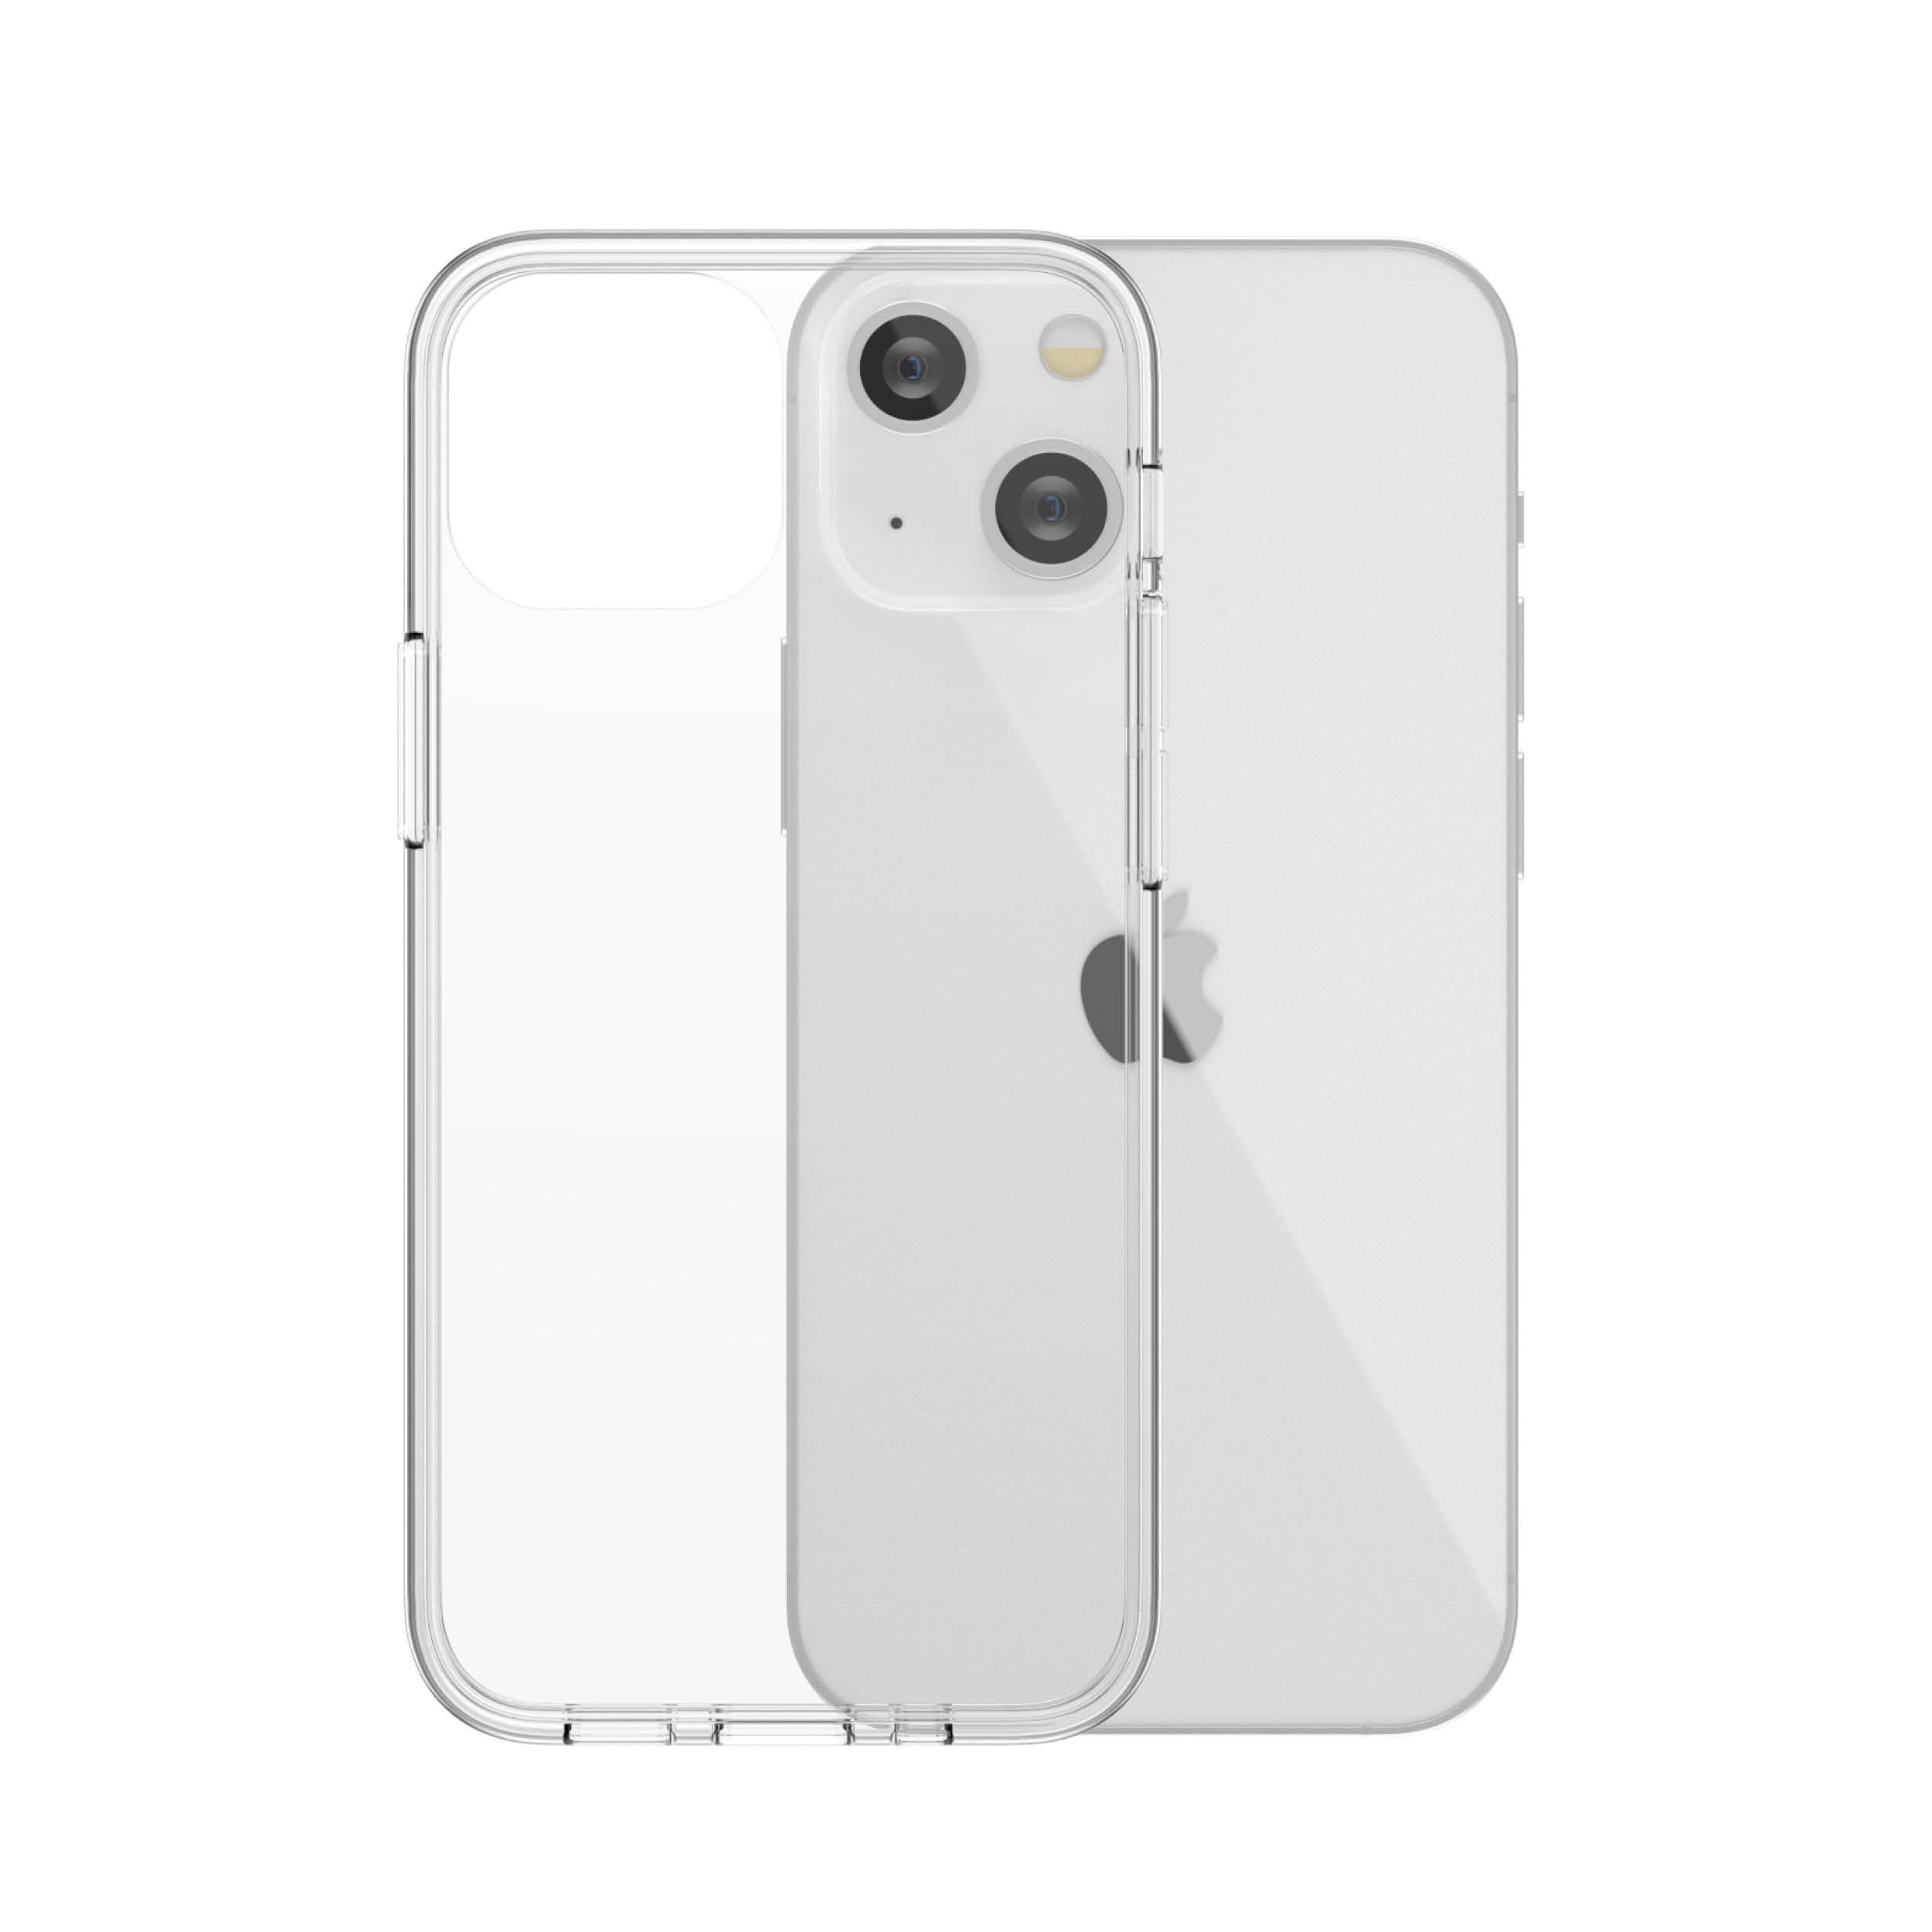 MINI, PANZERGLASS ClearCase, CLEAR APPLE, IPHONE Backcover, 13